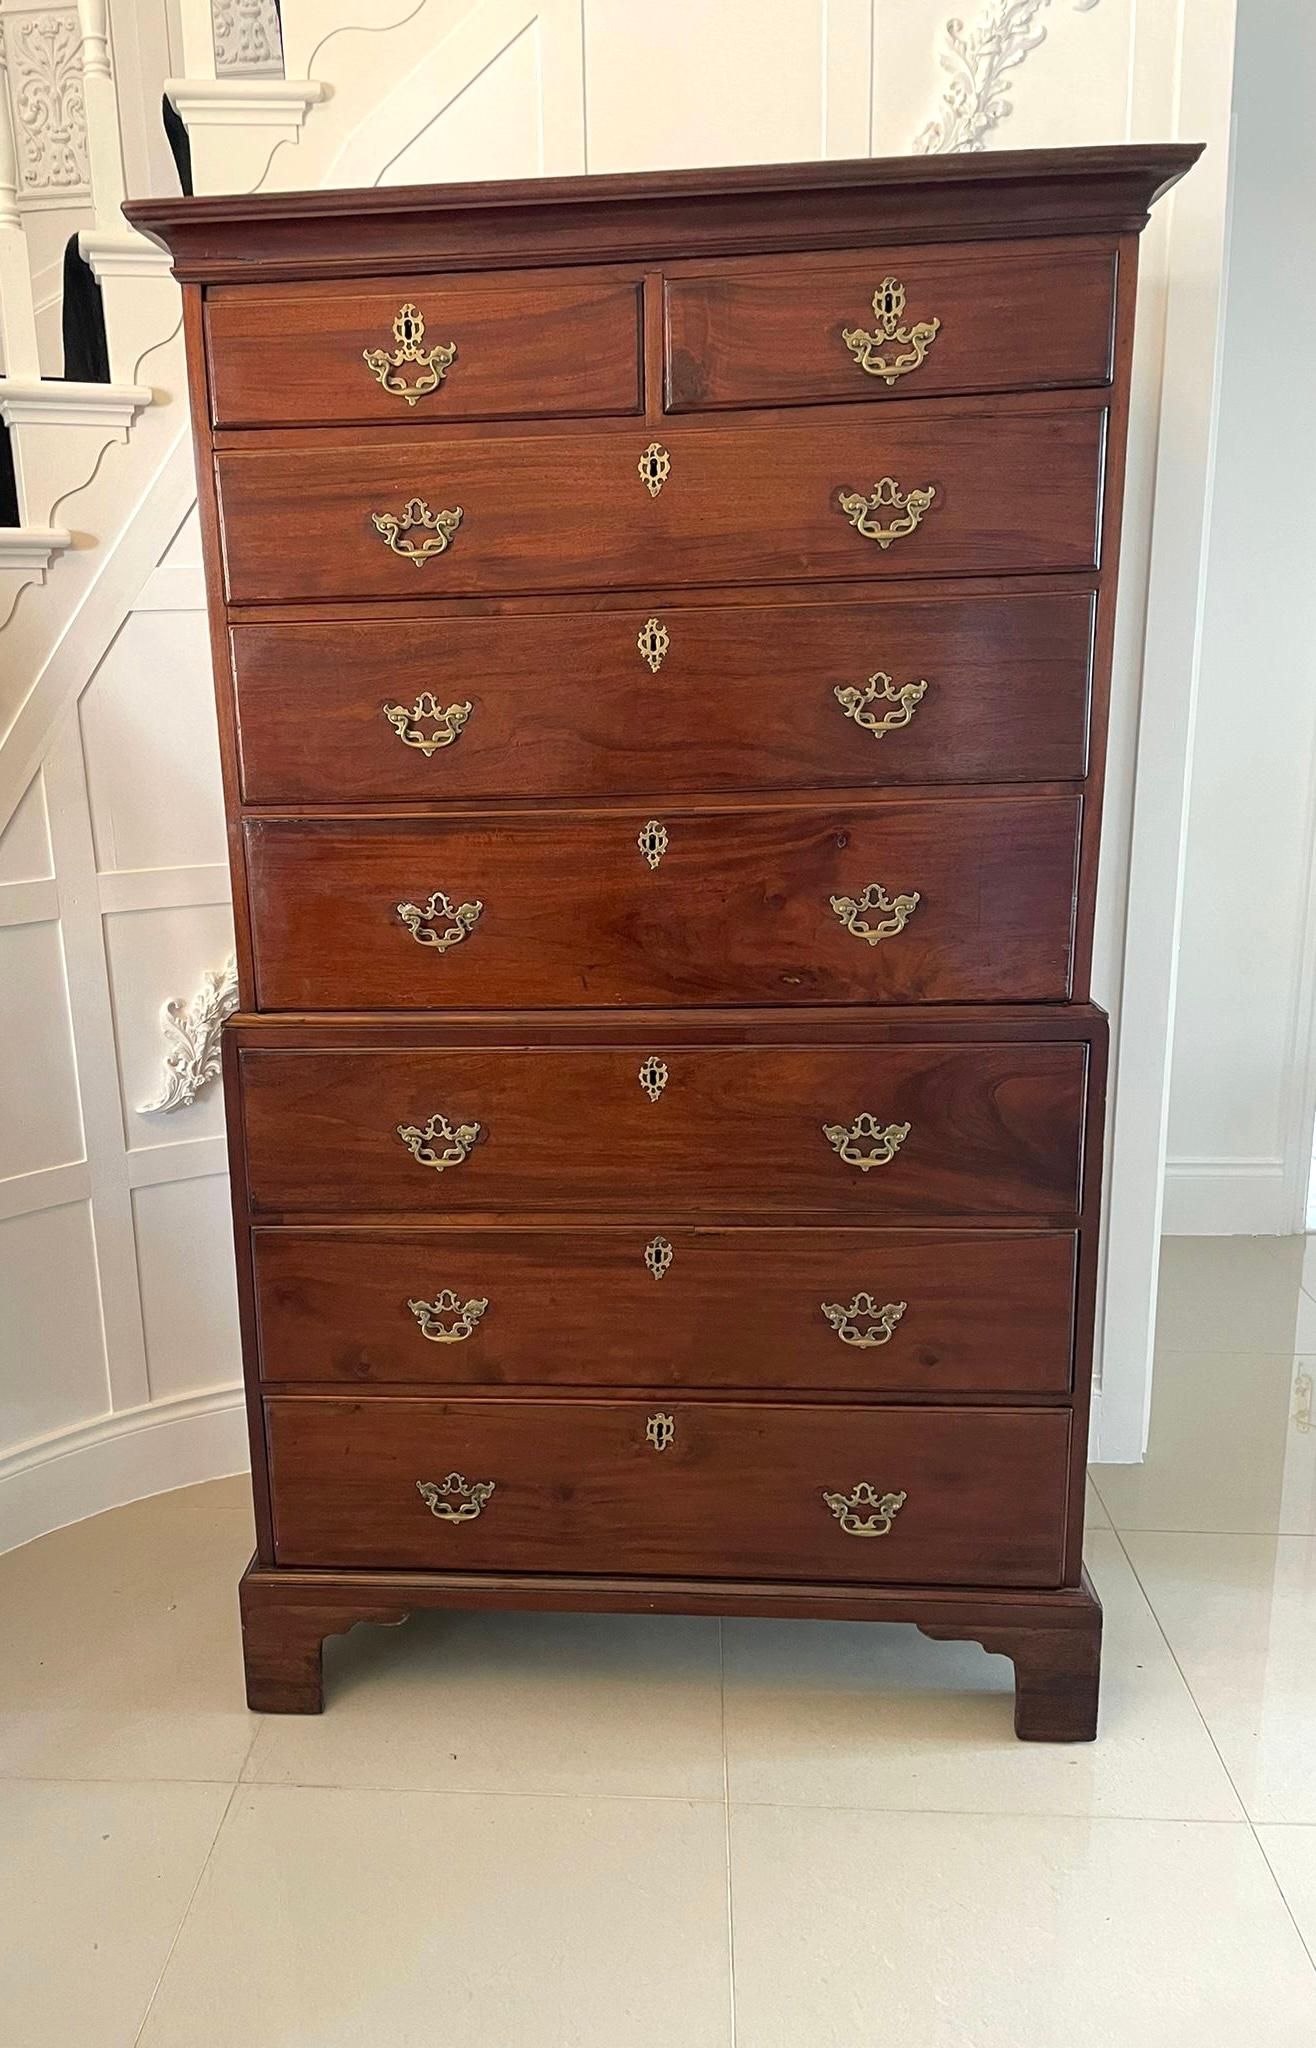 Magnificent George III mahogany chest on chest is a magnificent example of quality and craftsmanship from the Georgian period. It boasts a shaped moulded cornice above two short and three long graduated drawers. The base has three long drawers